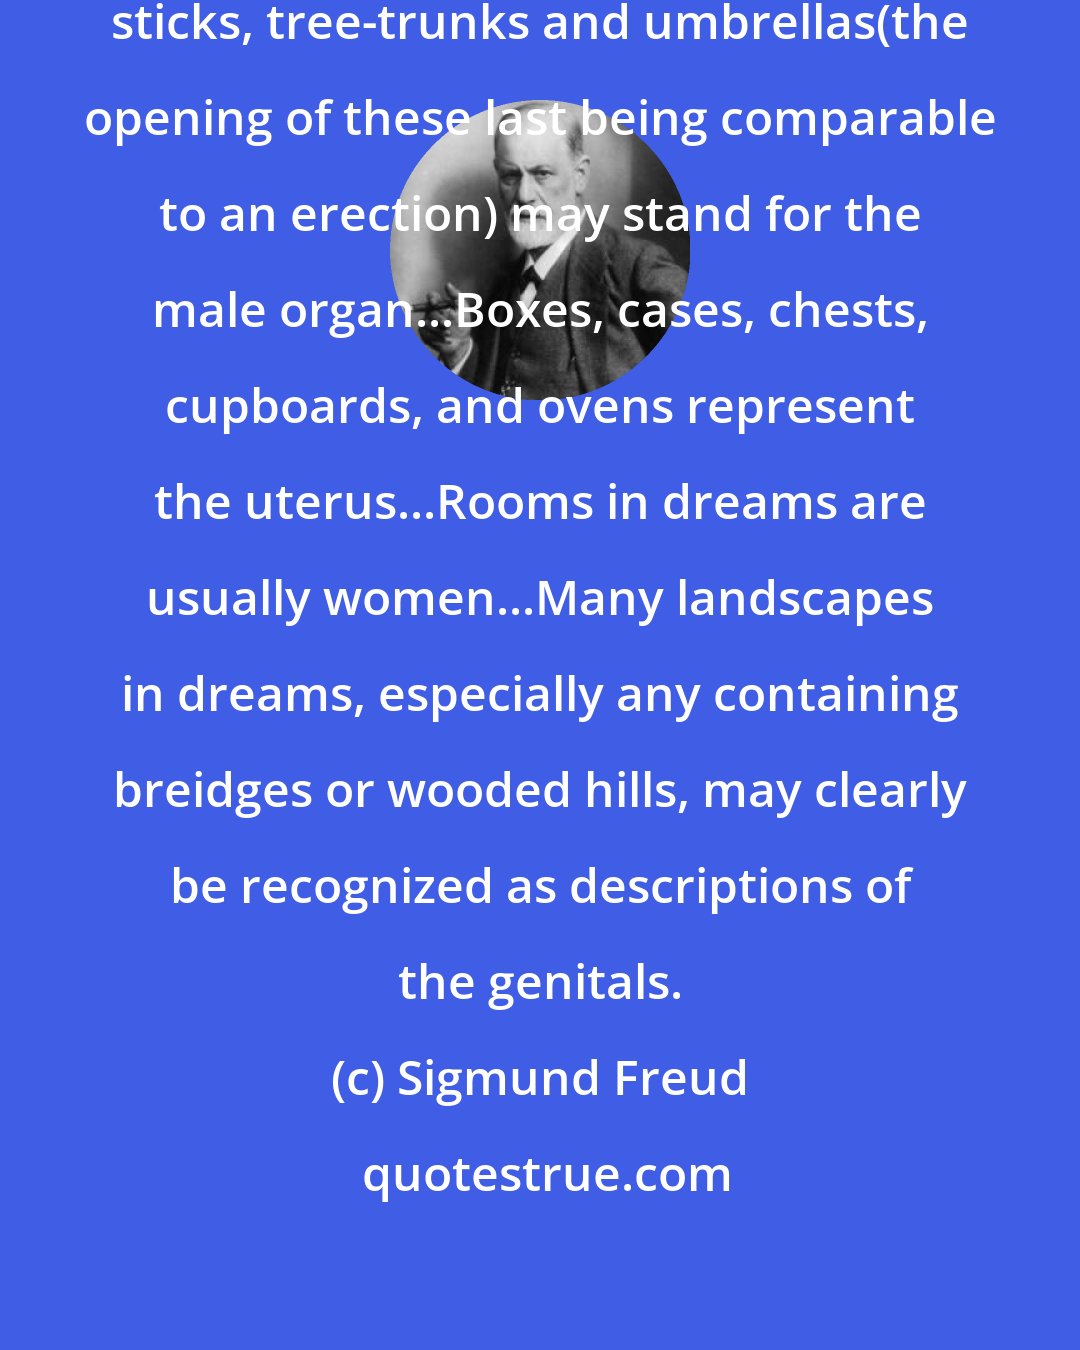 Sigmund Freud: All elongated objects, such as sticks, tree-trunks and umbrellas(the opening of these last being comparable to an erection) may stand for the male organ...Boxes, cases, chests, cupboards, and ovens represent the uterus...Rooms in dreams are usually women...Many landscapes in dreams, especially any containing breidges or wooded hills, may clearly be recognized as descriptions of the genitals.